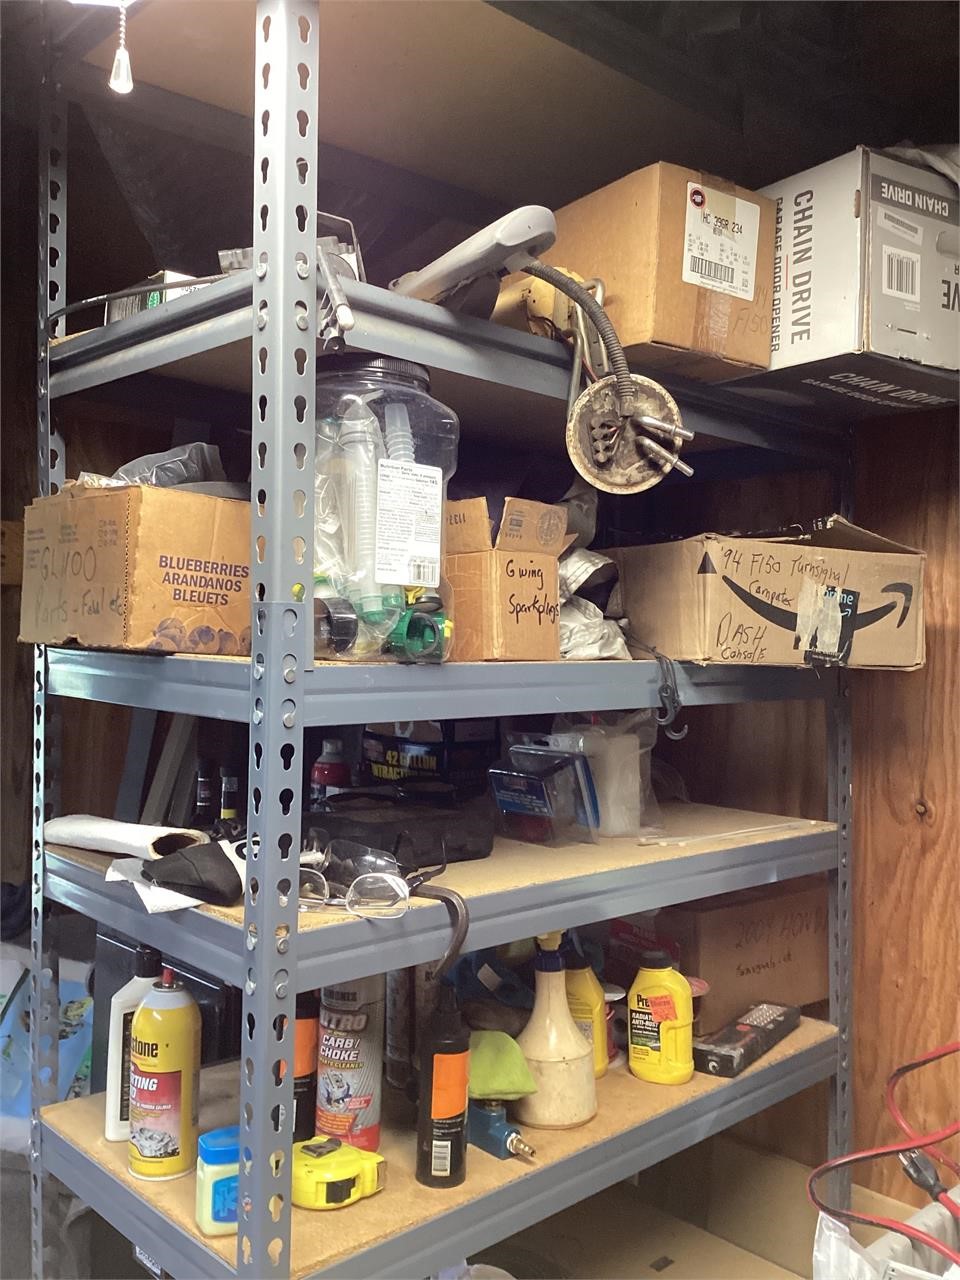 Gray metal shelving unit with contents